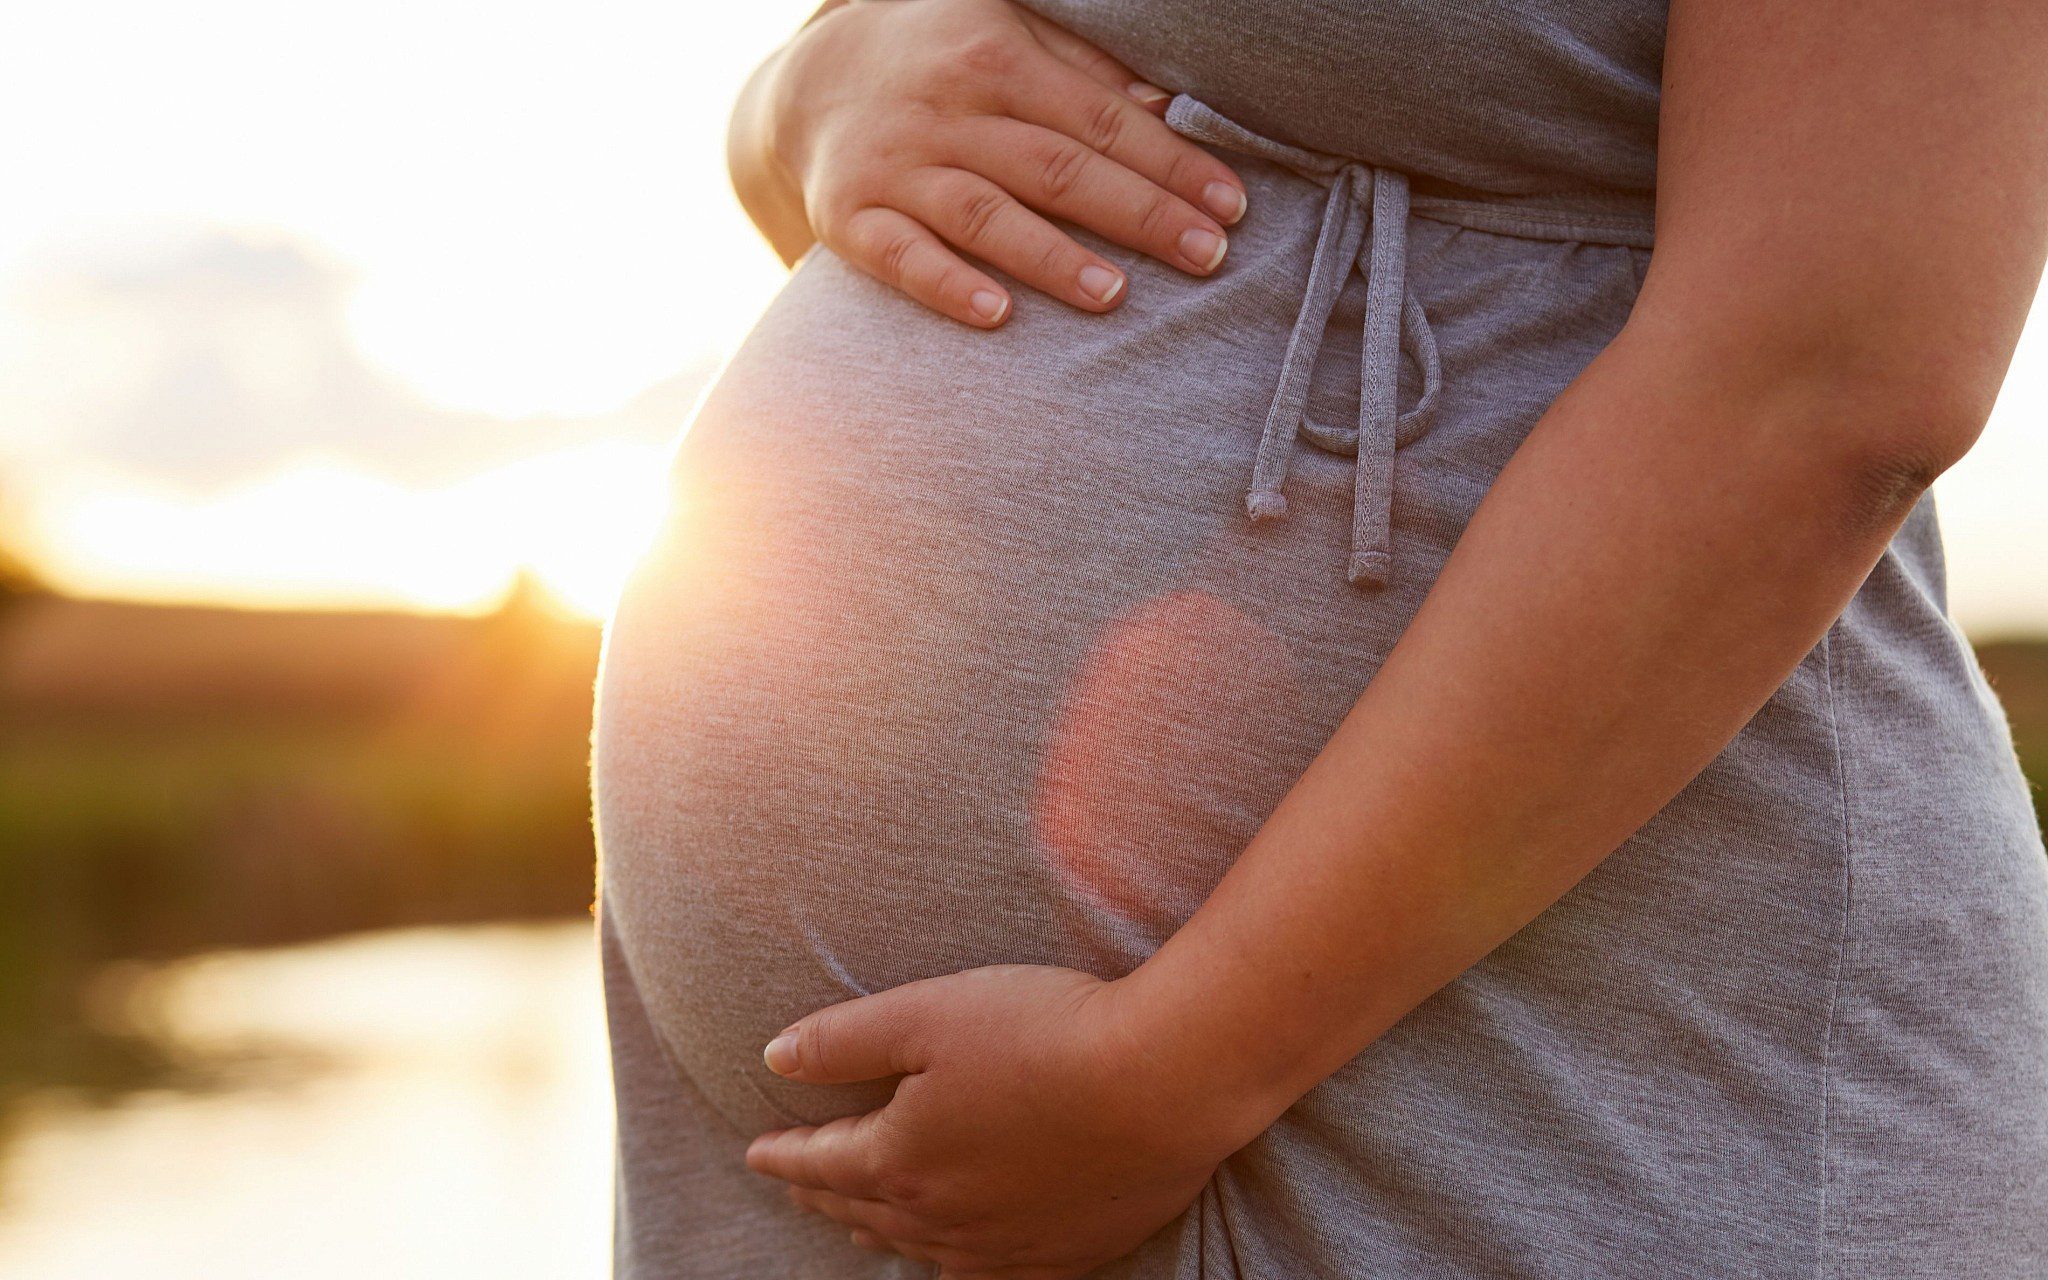 Two lawyers suspended after getting pregnant